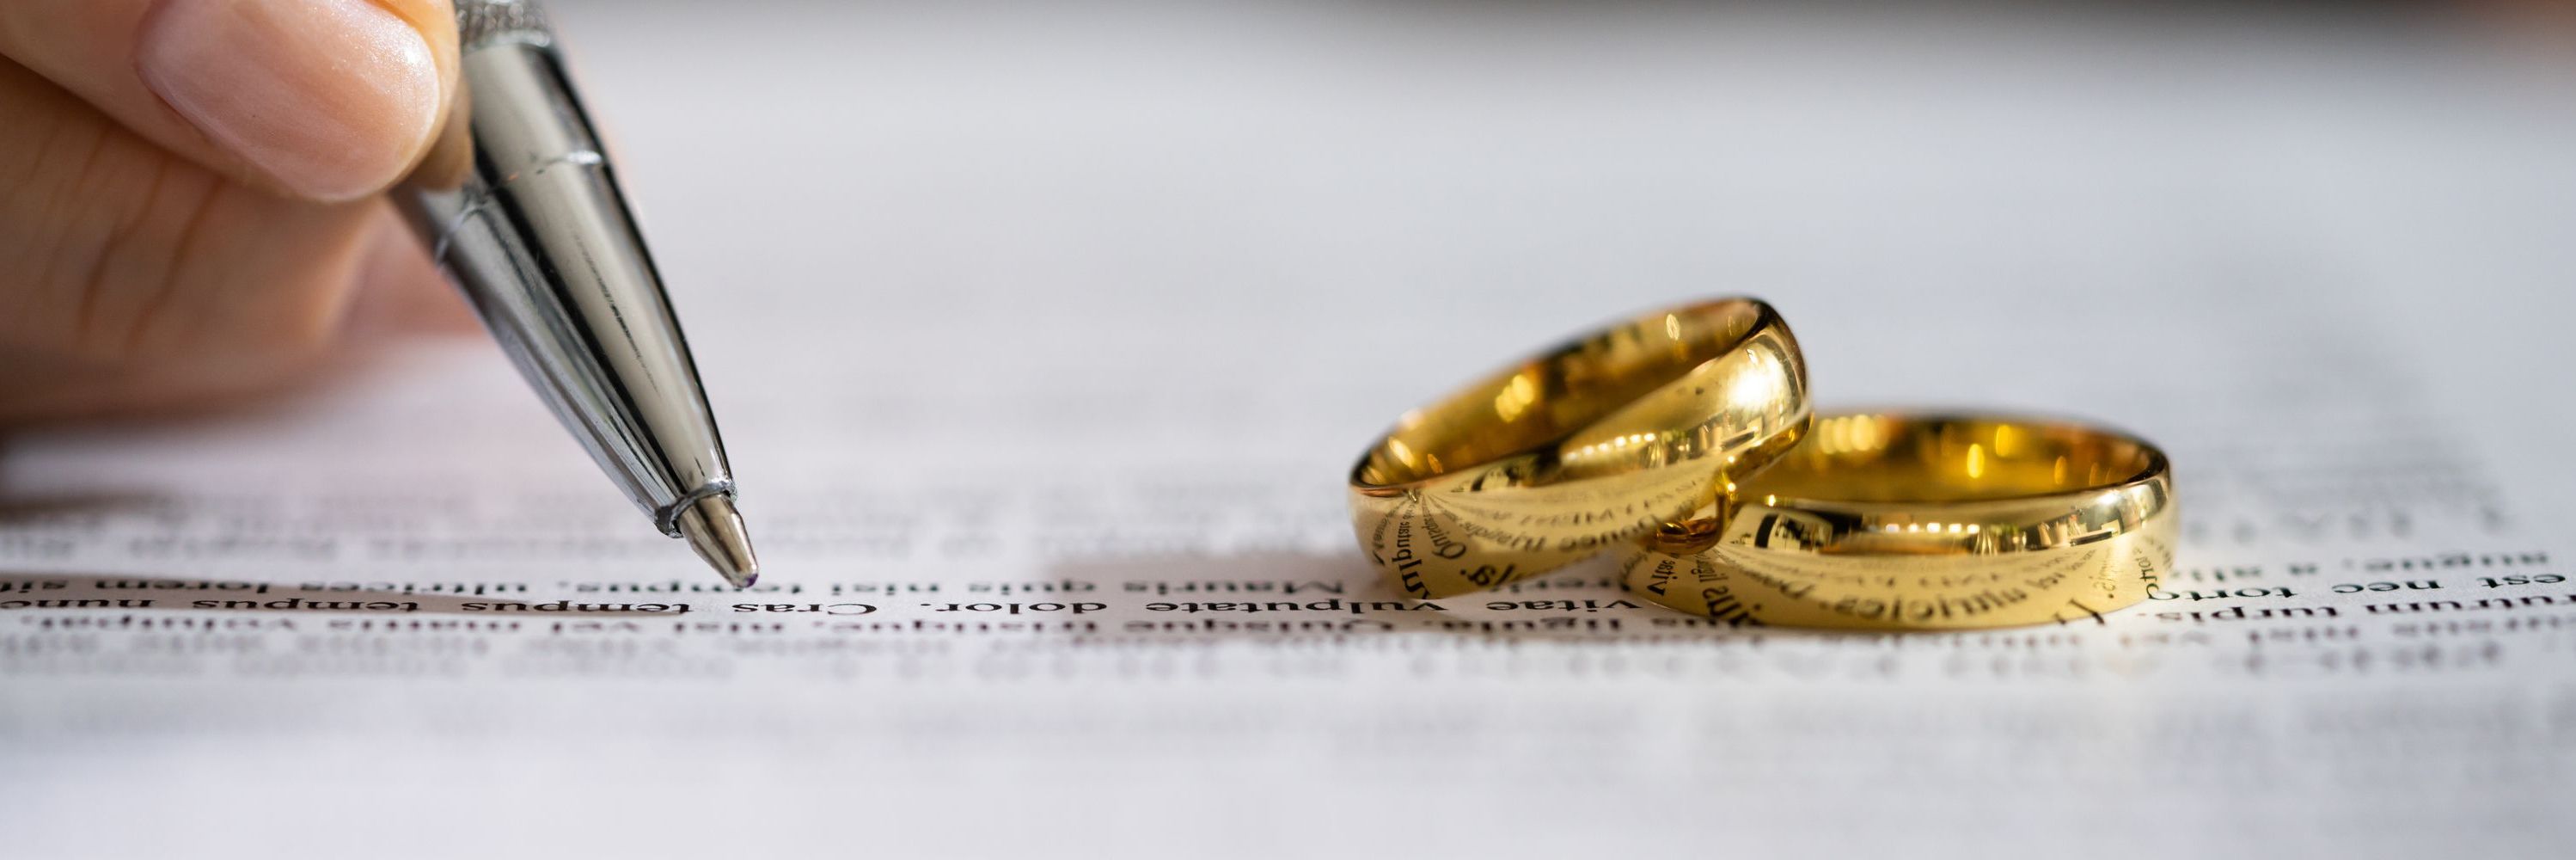 Small Money Divorce Cases - Guidance & Top Tips for Family Lawyers 